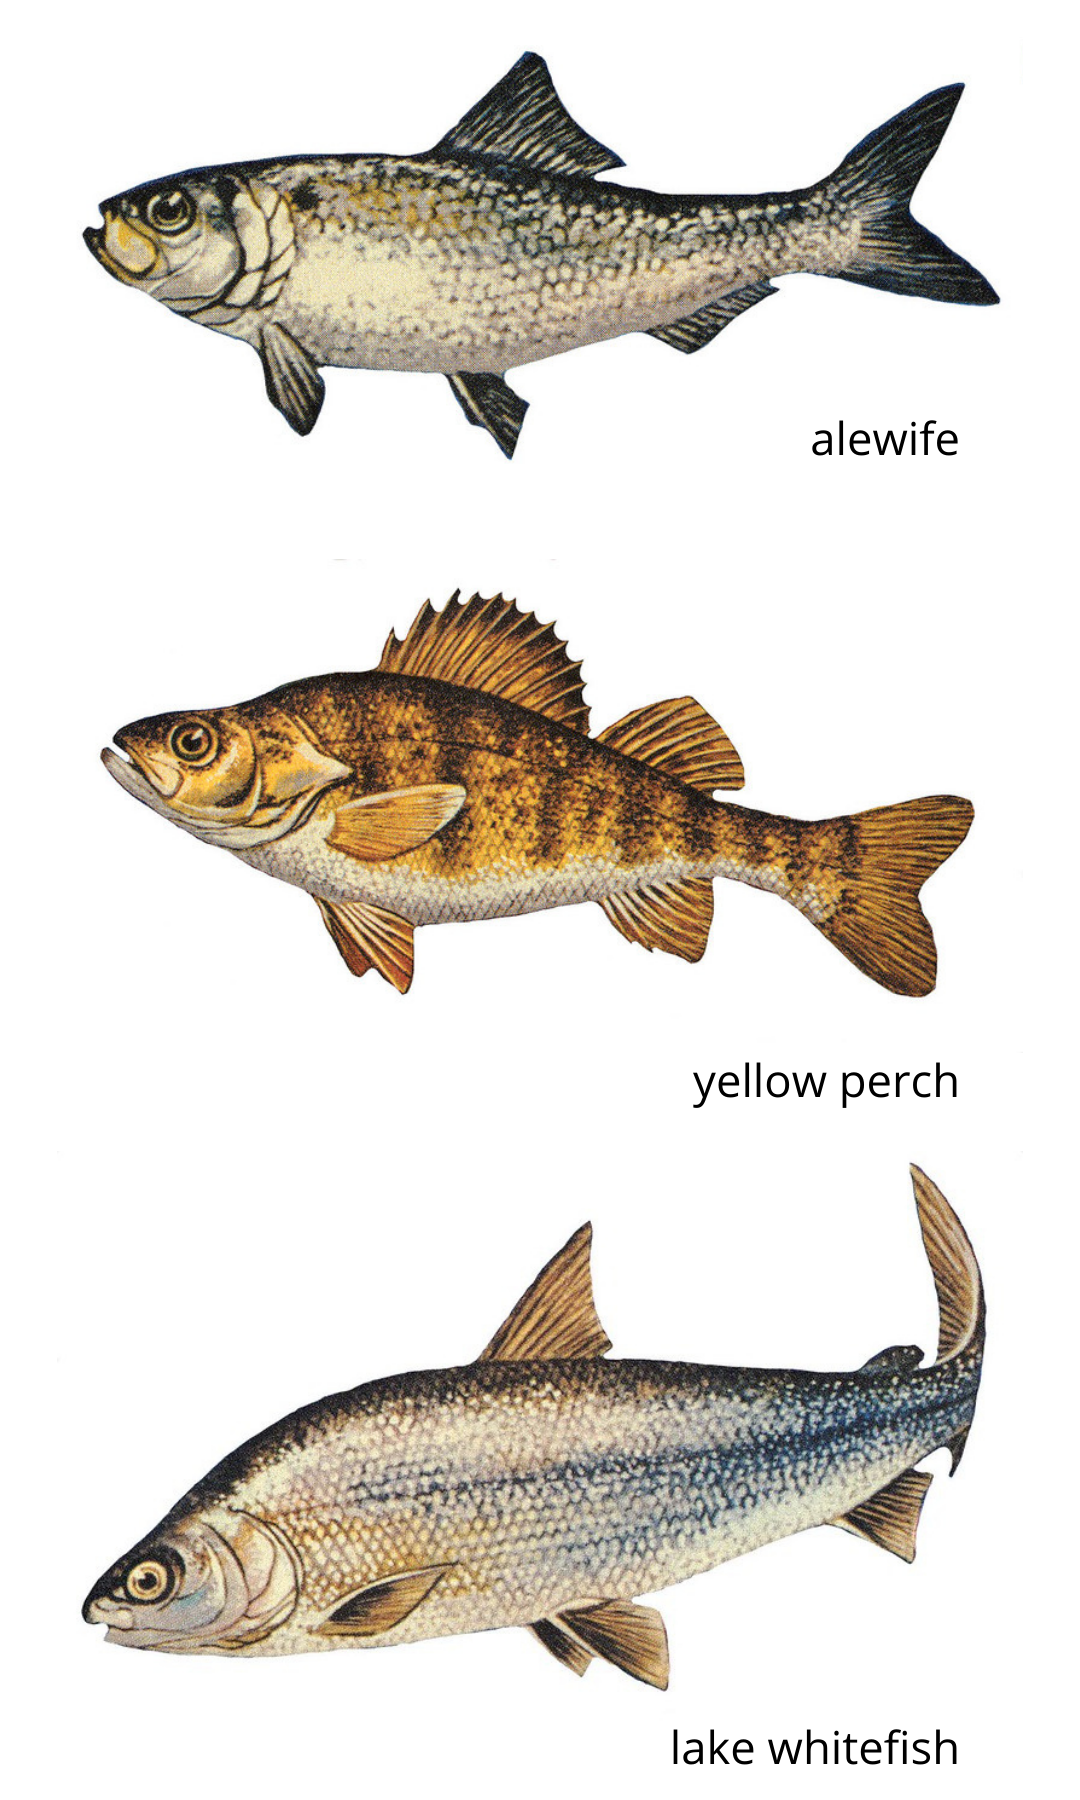 illustrations of alewife, yellow perch, and lake whitefish